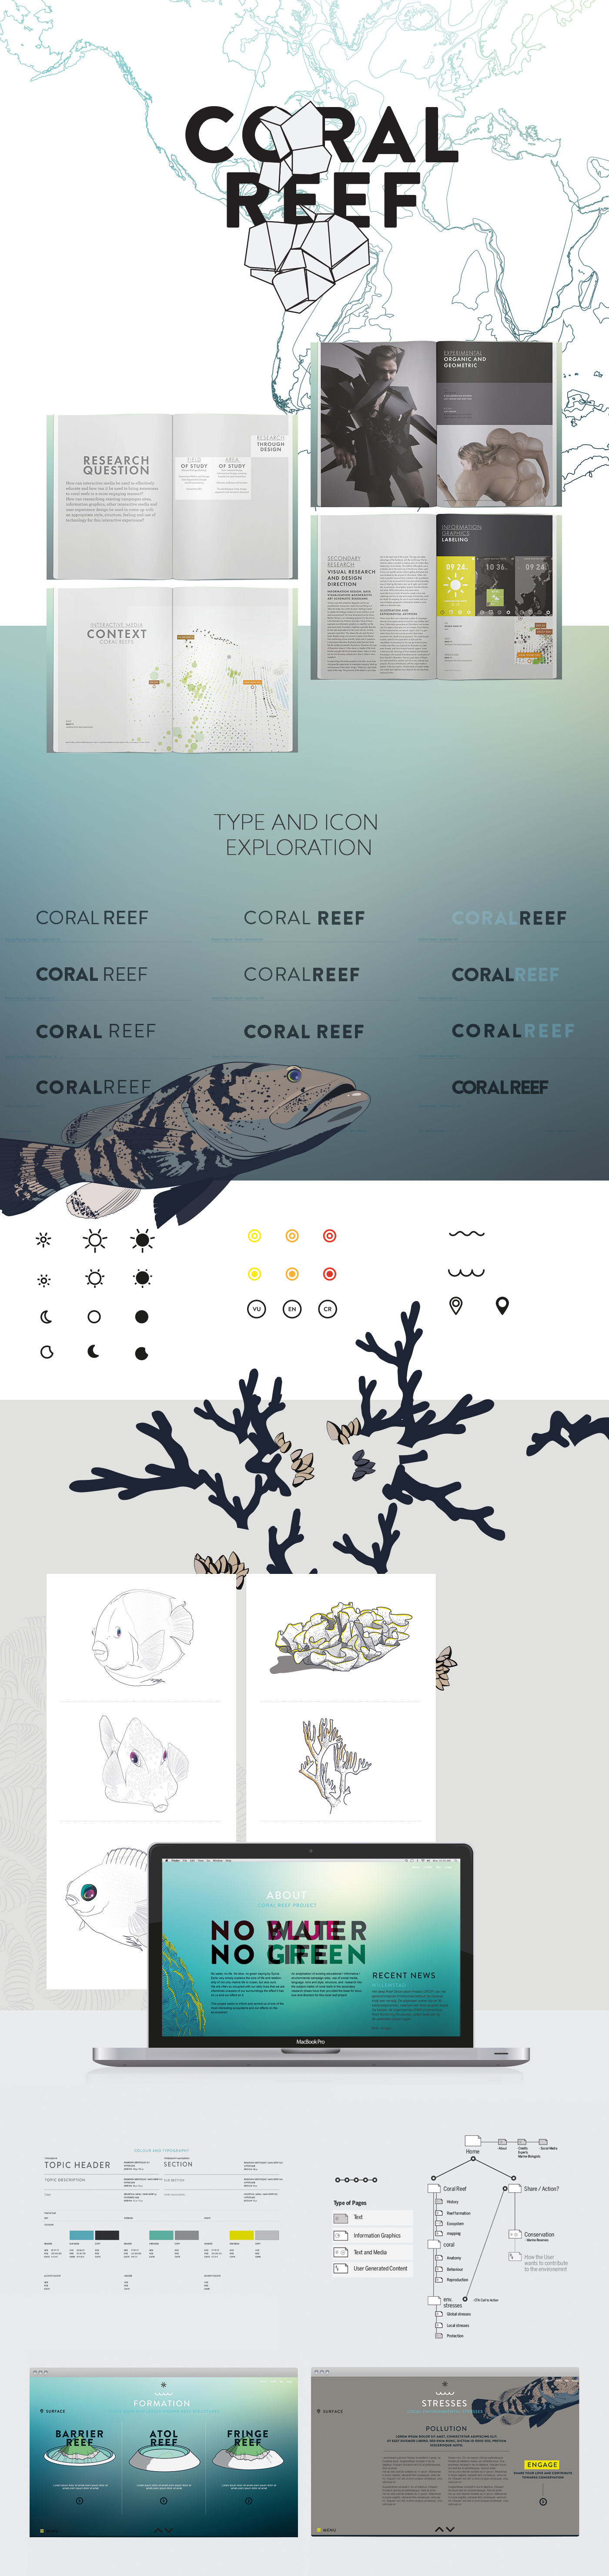 coral reef reef engage discover User Generated Content ux